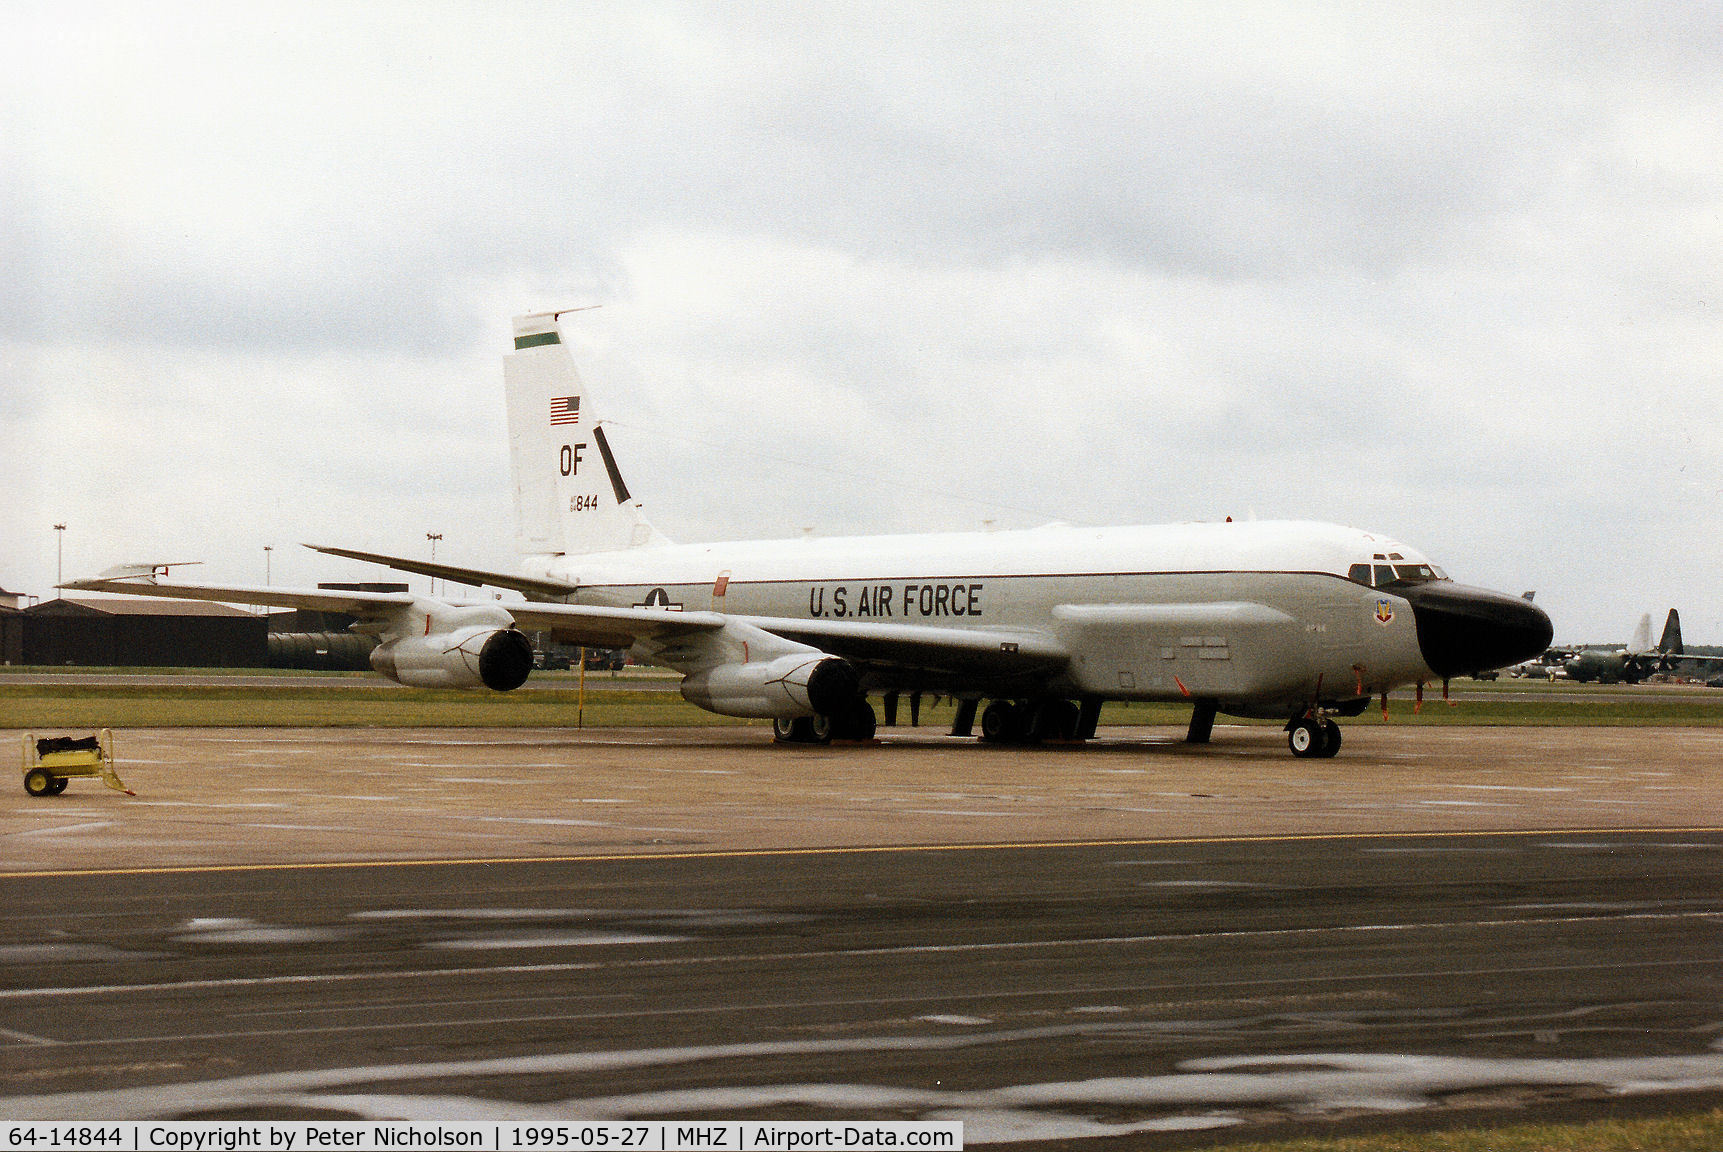 64-14844, 1964 Boeing RC-135V Rivet Joint C/N 18784, RC-135V Cobra Ball of the 55th Wing at Offutt AFB on the flight-line at the 1995 RAF Mildenhall Air Fete.